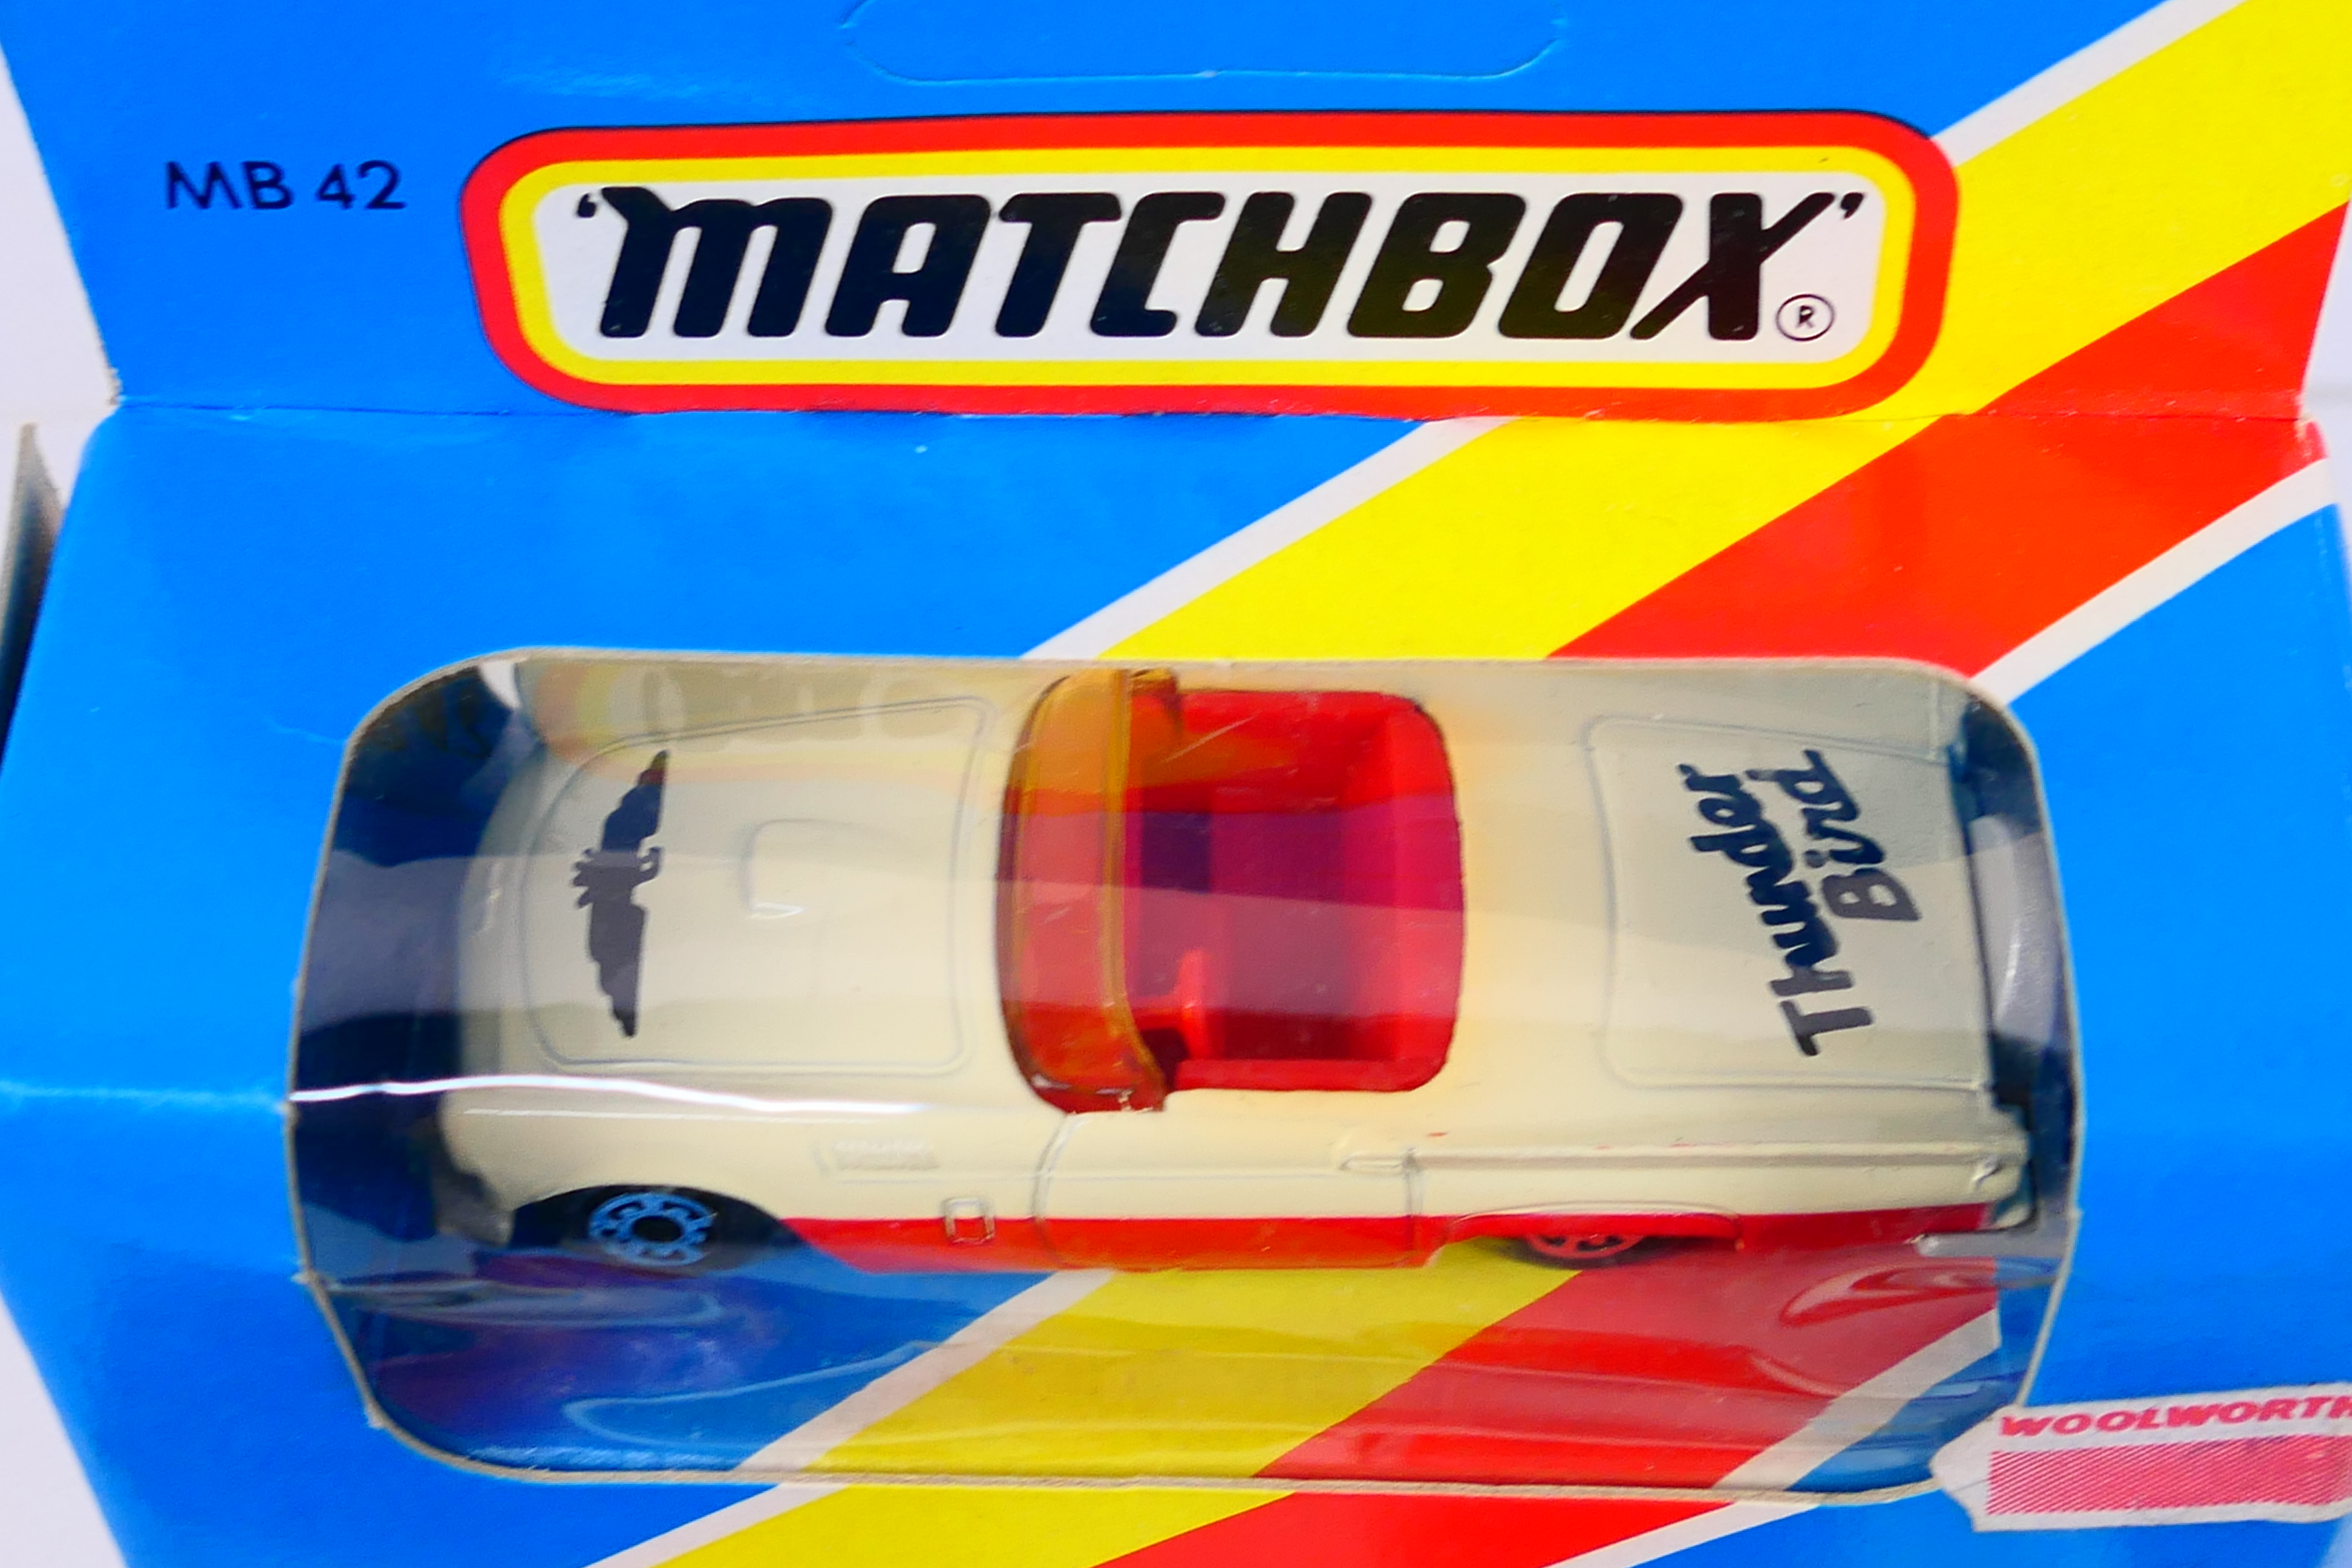 Matchbox - 3 x boxed models, Ford Thunderbird in red # 42, - Image 3 of 6